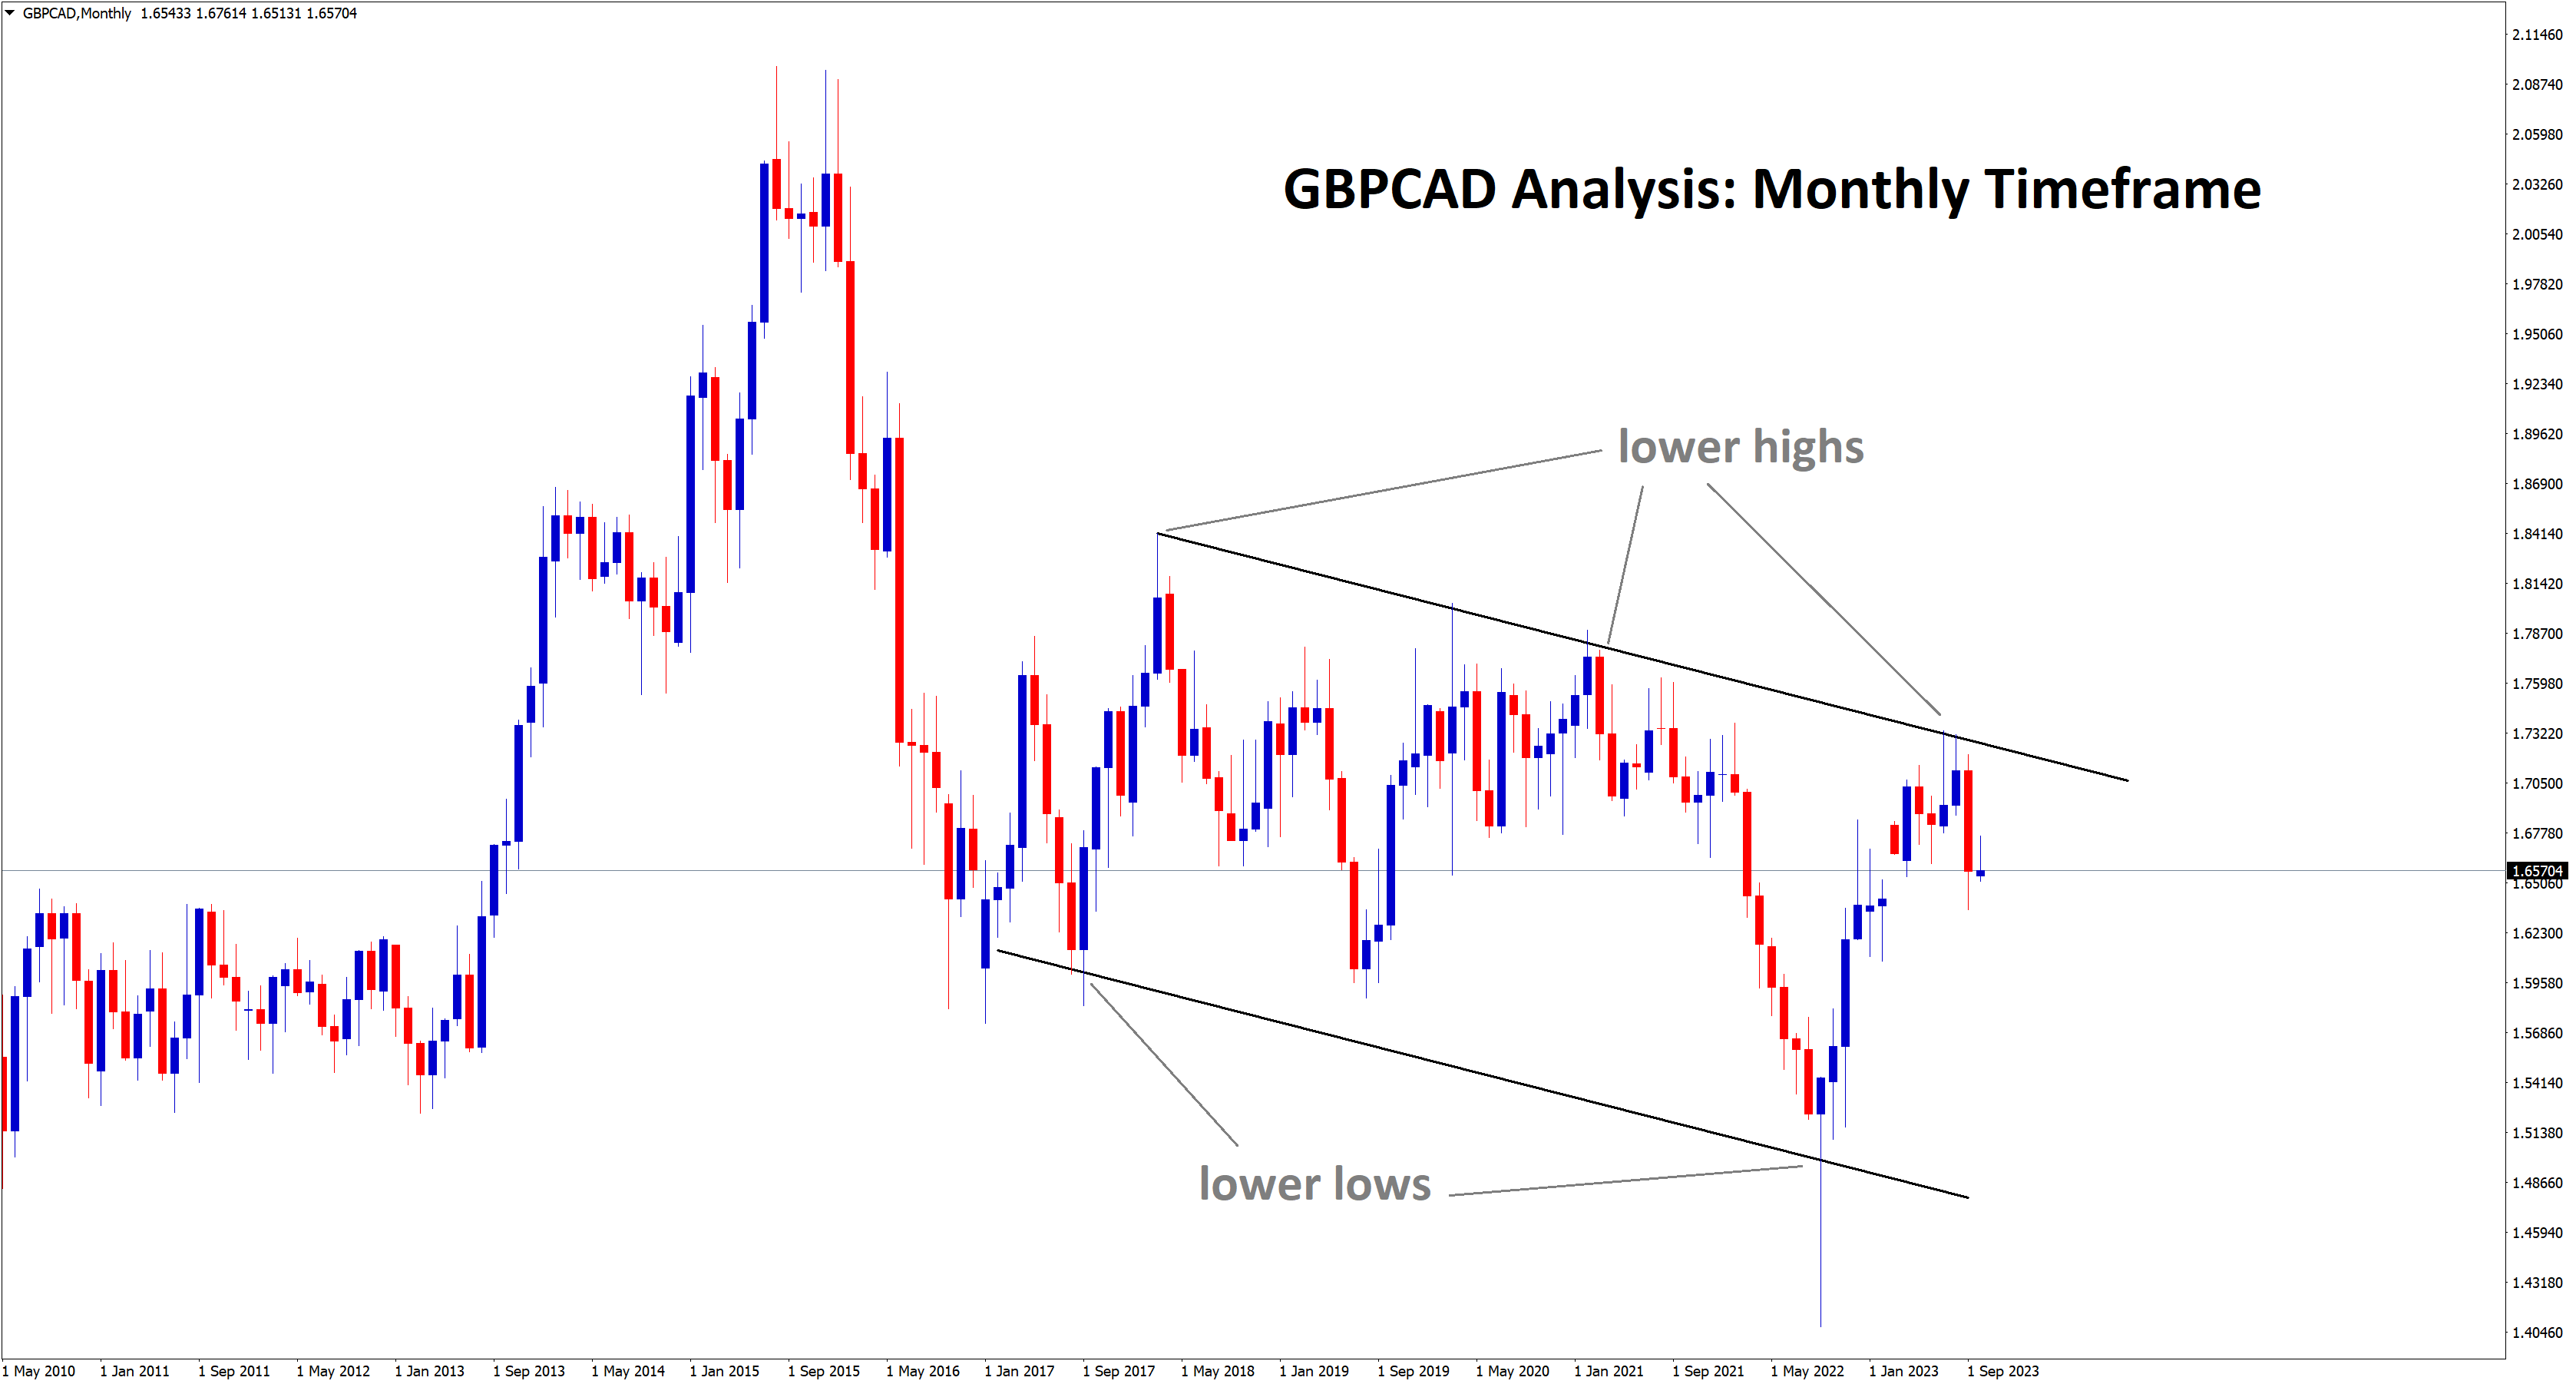 gbpcad falling from lower high